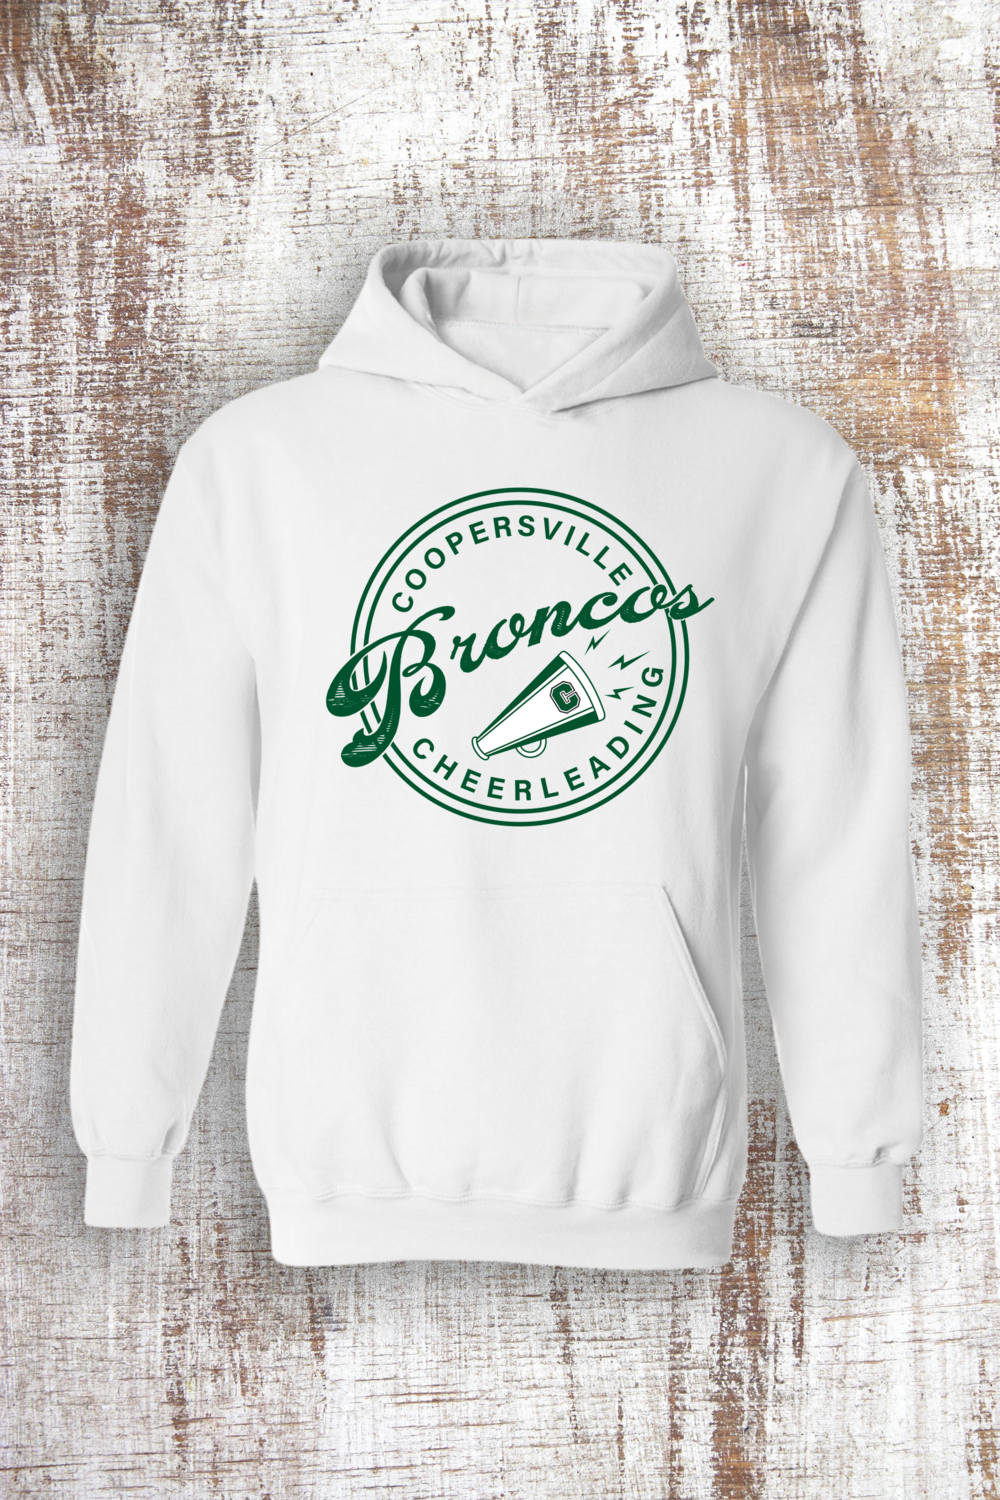 Broncos Circle Cheer Hooded and Crew Sweatshirt, Color: White Hooded